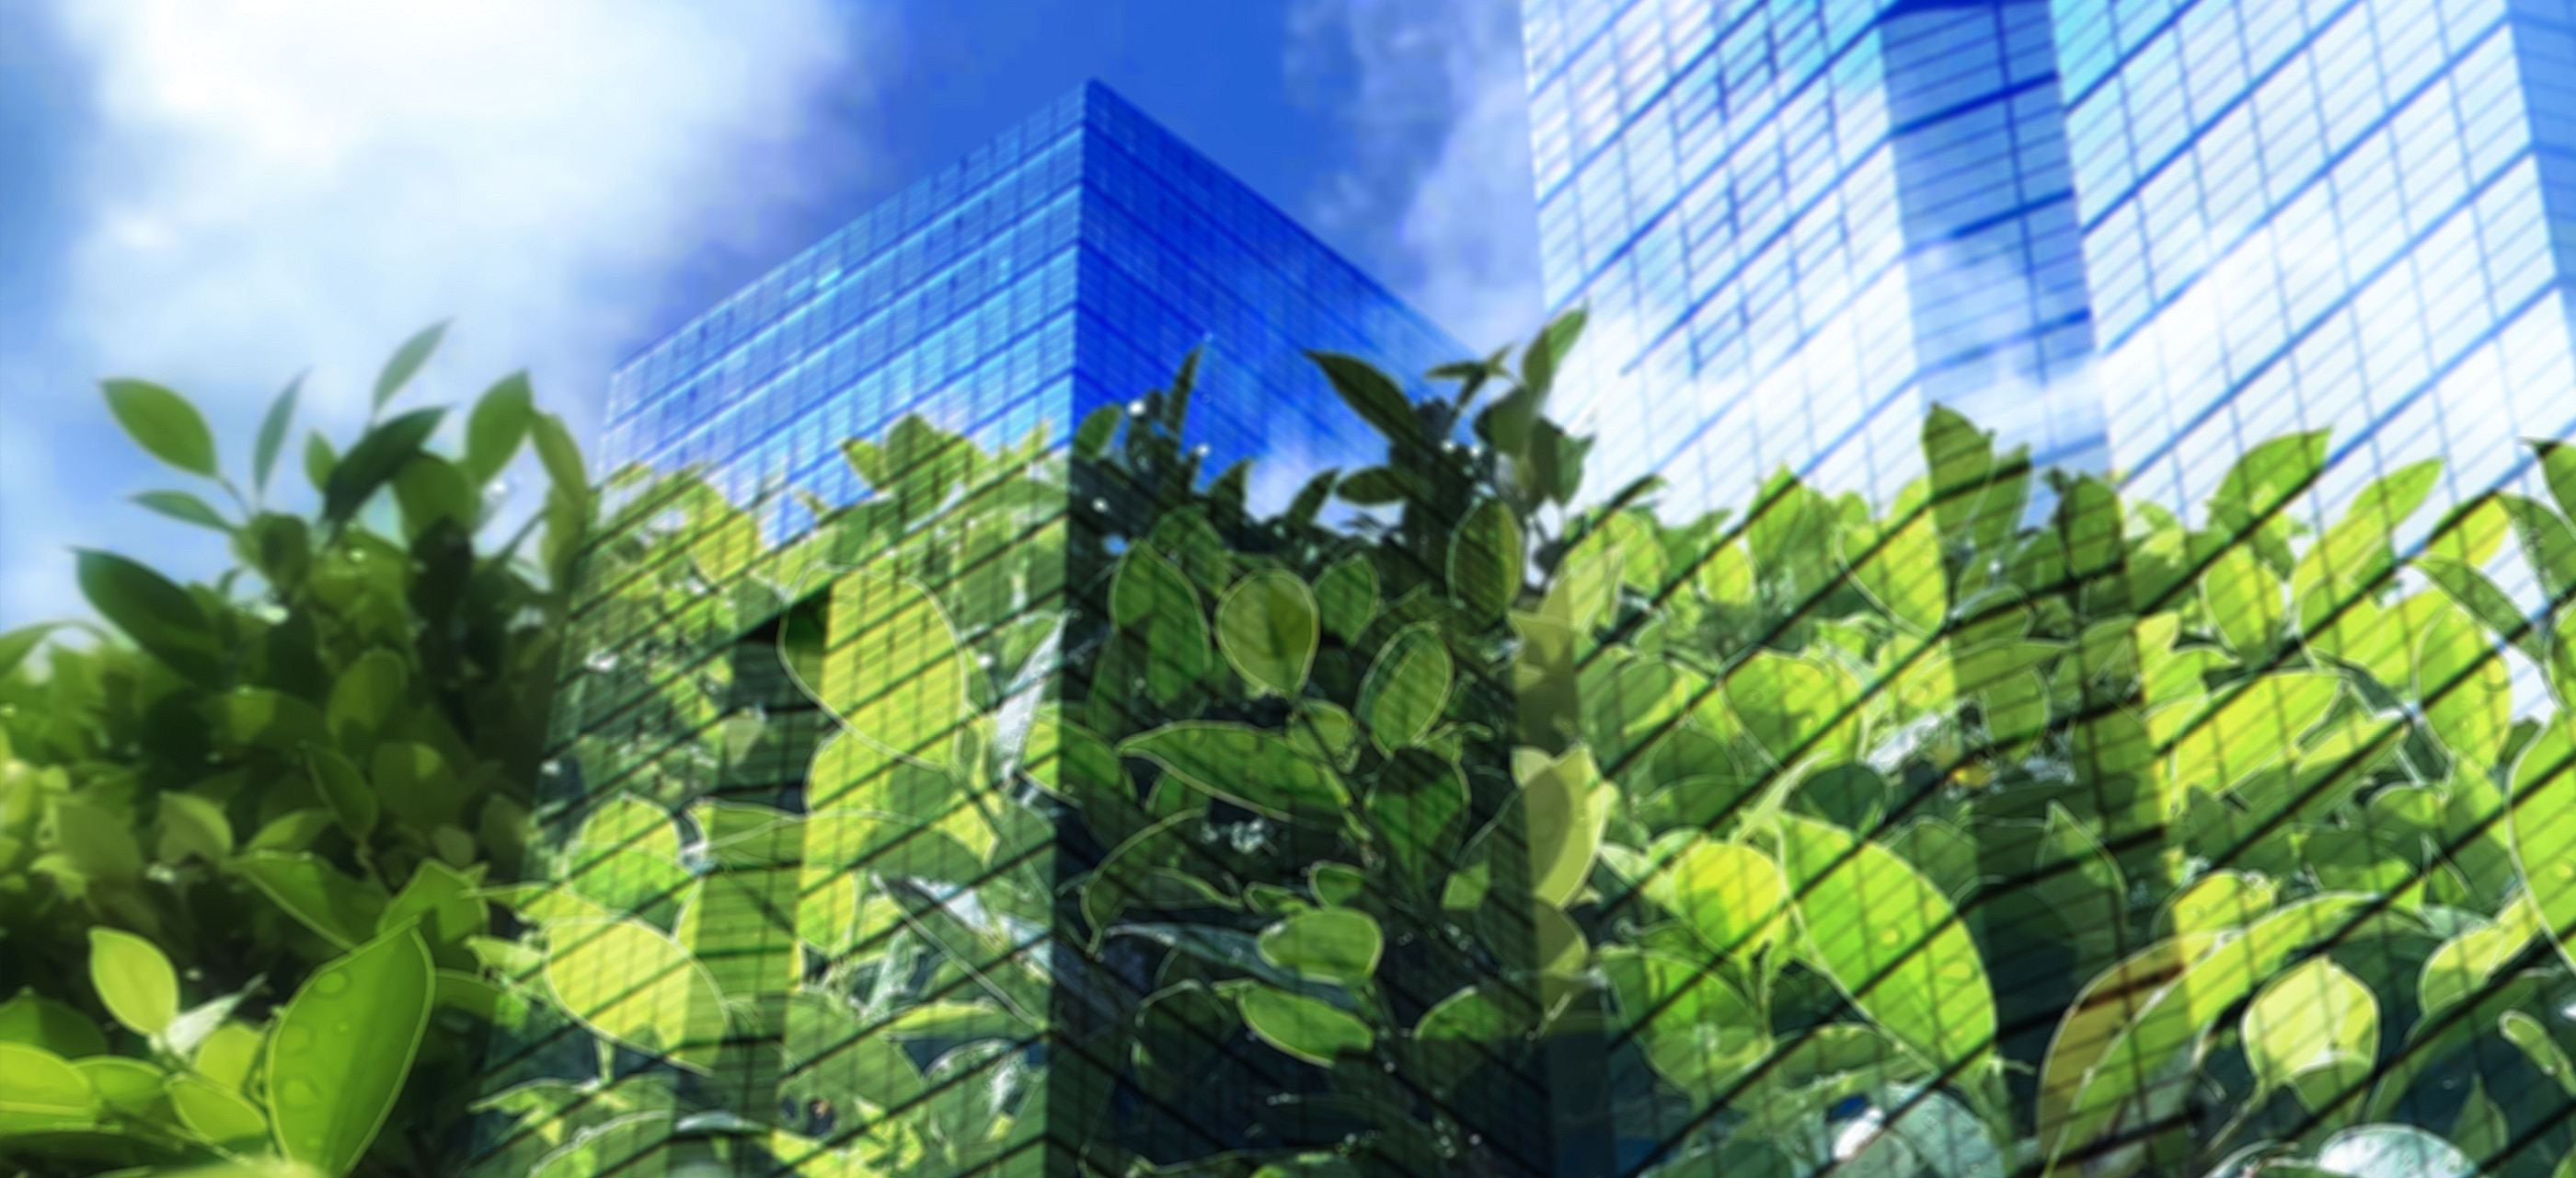 The Need For Net Zero Carbon Buildings | Johnson Controls